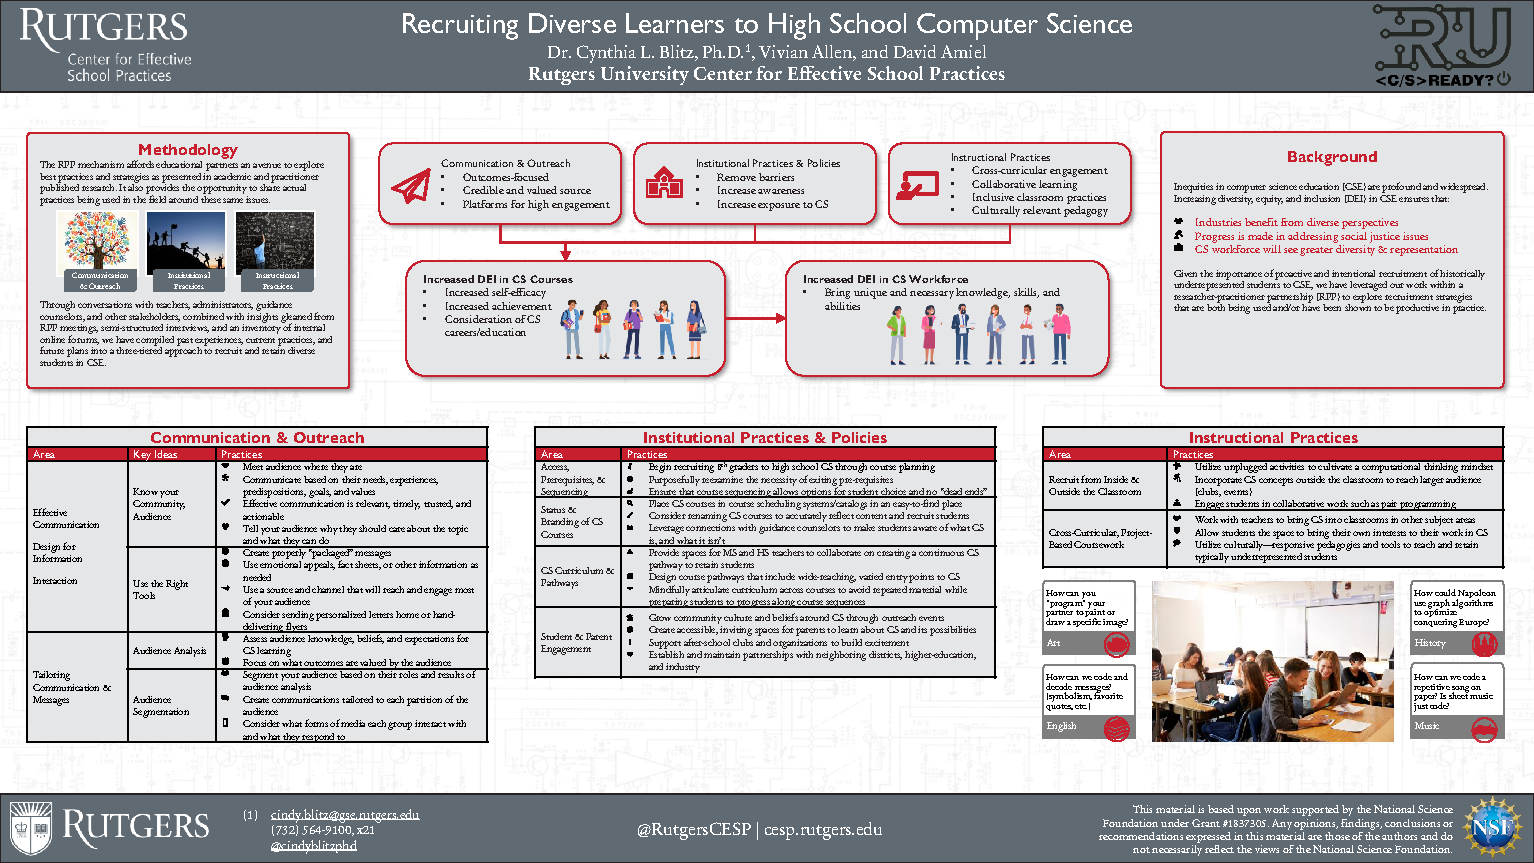 Recruiting Diverse Learners to High School Computer Science